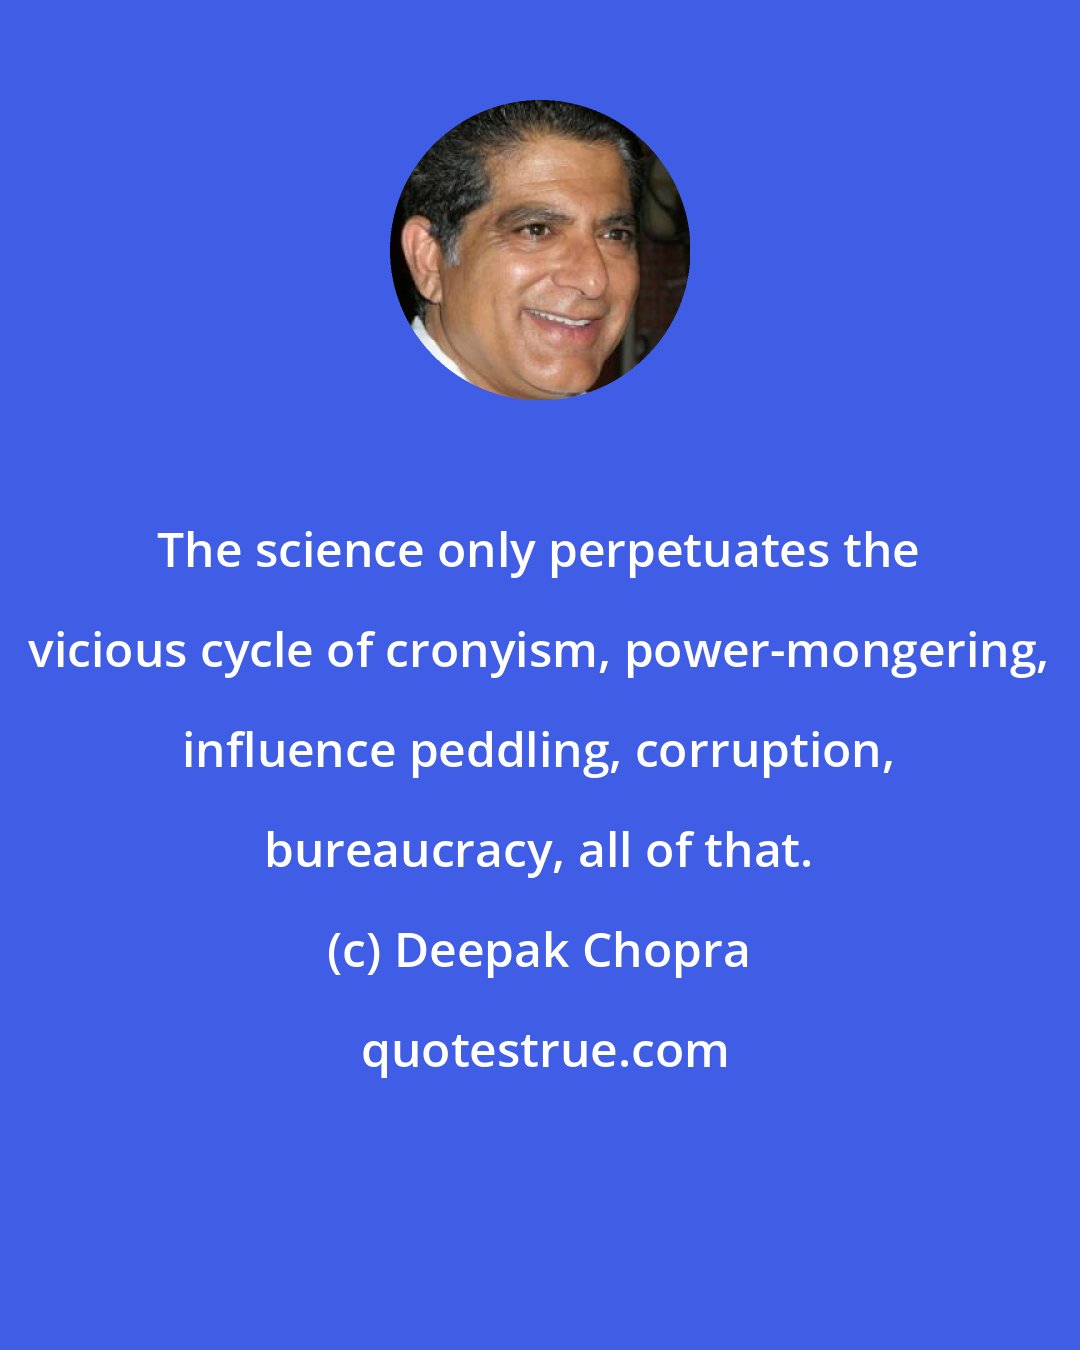 Deepak Chopra: The science only perpetuates the vicious cycle of cronyism, power-mongering, influence peddling, corruption, bureaucracy, all of that.